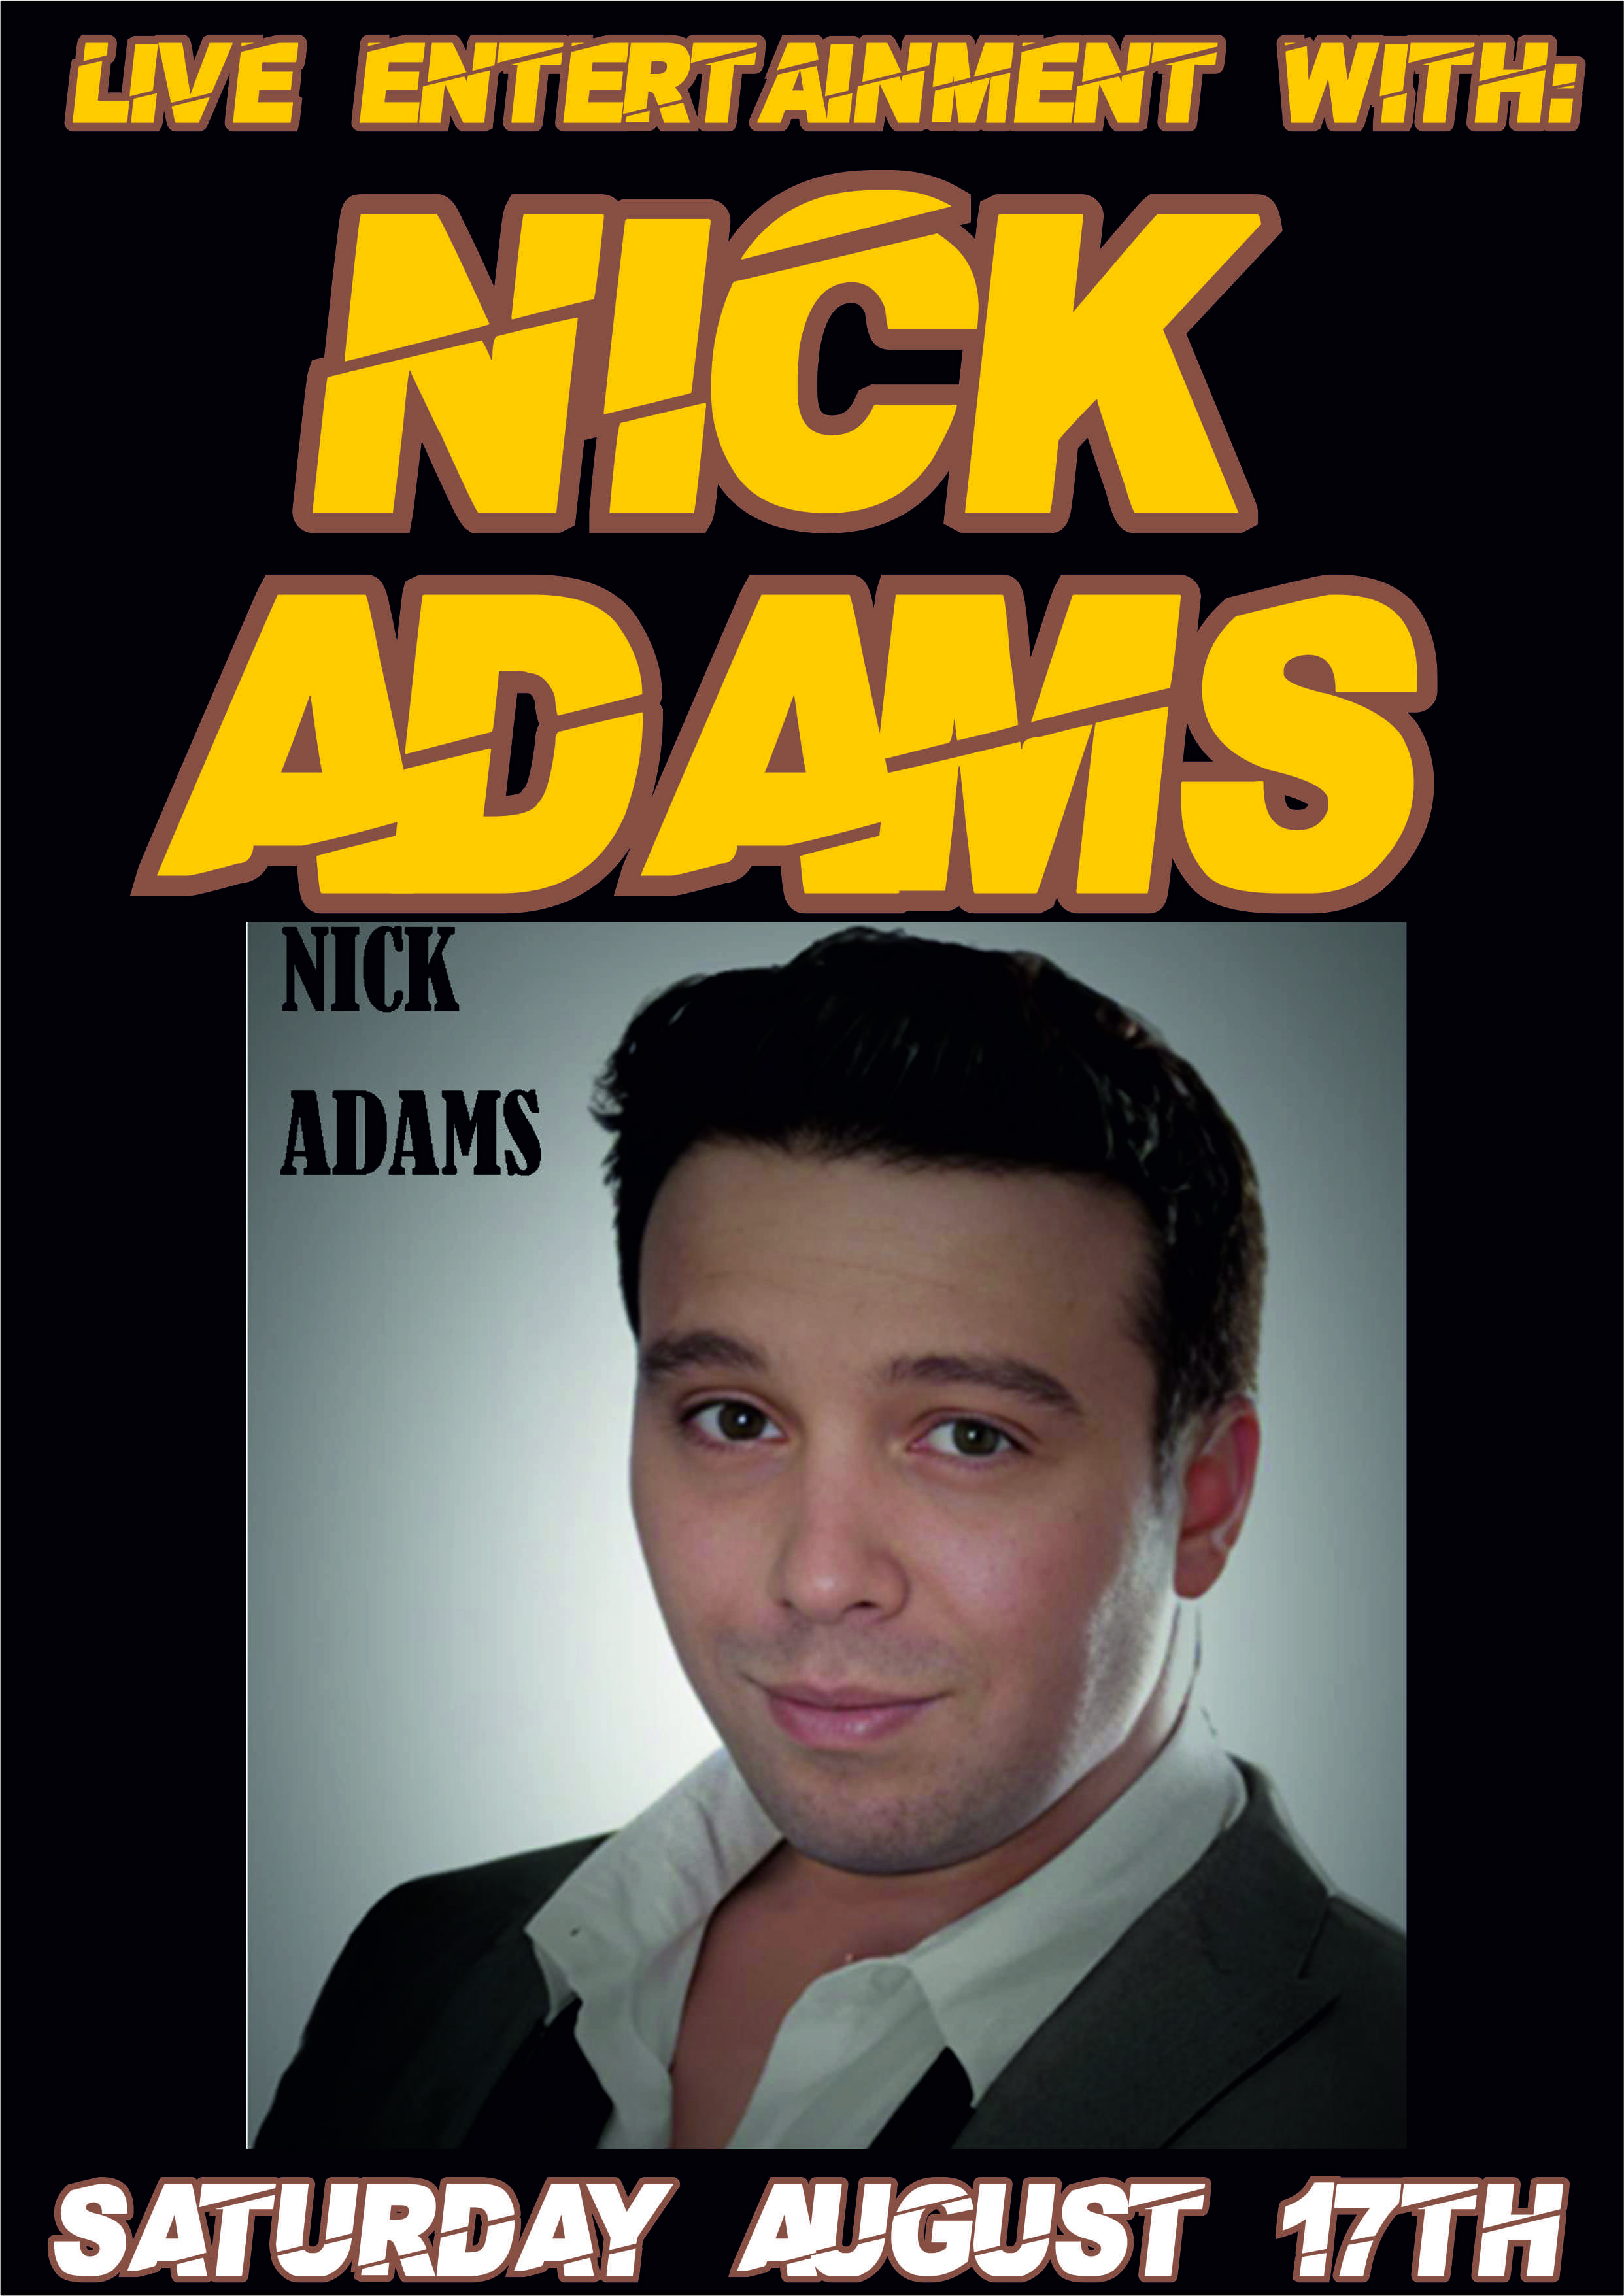 Live Entertainment with Nick Adams